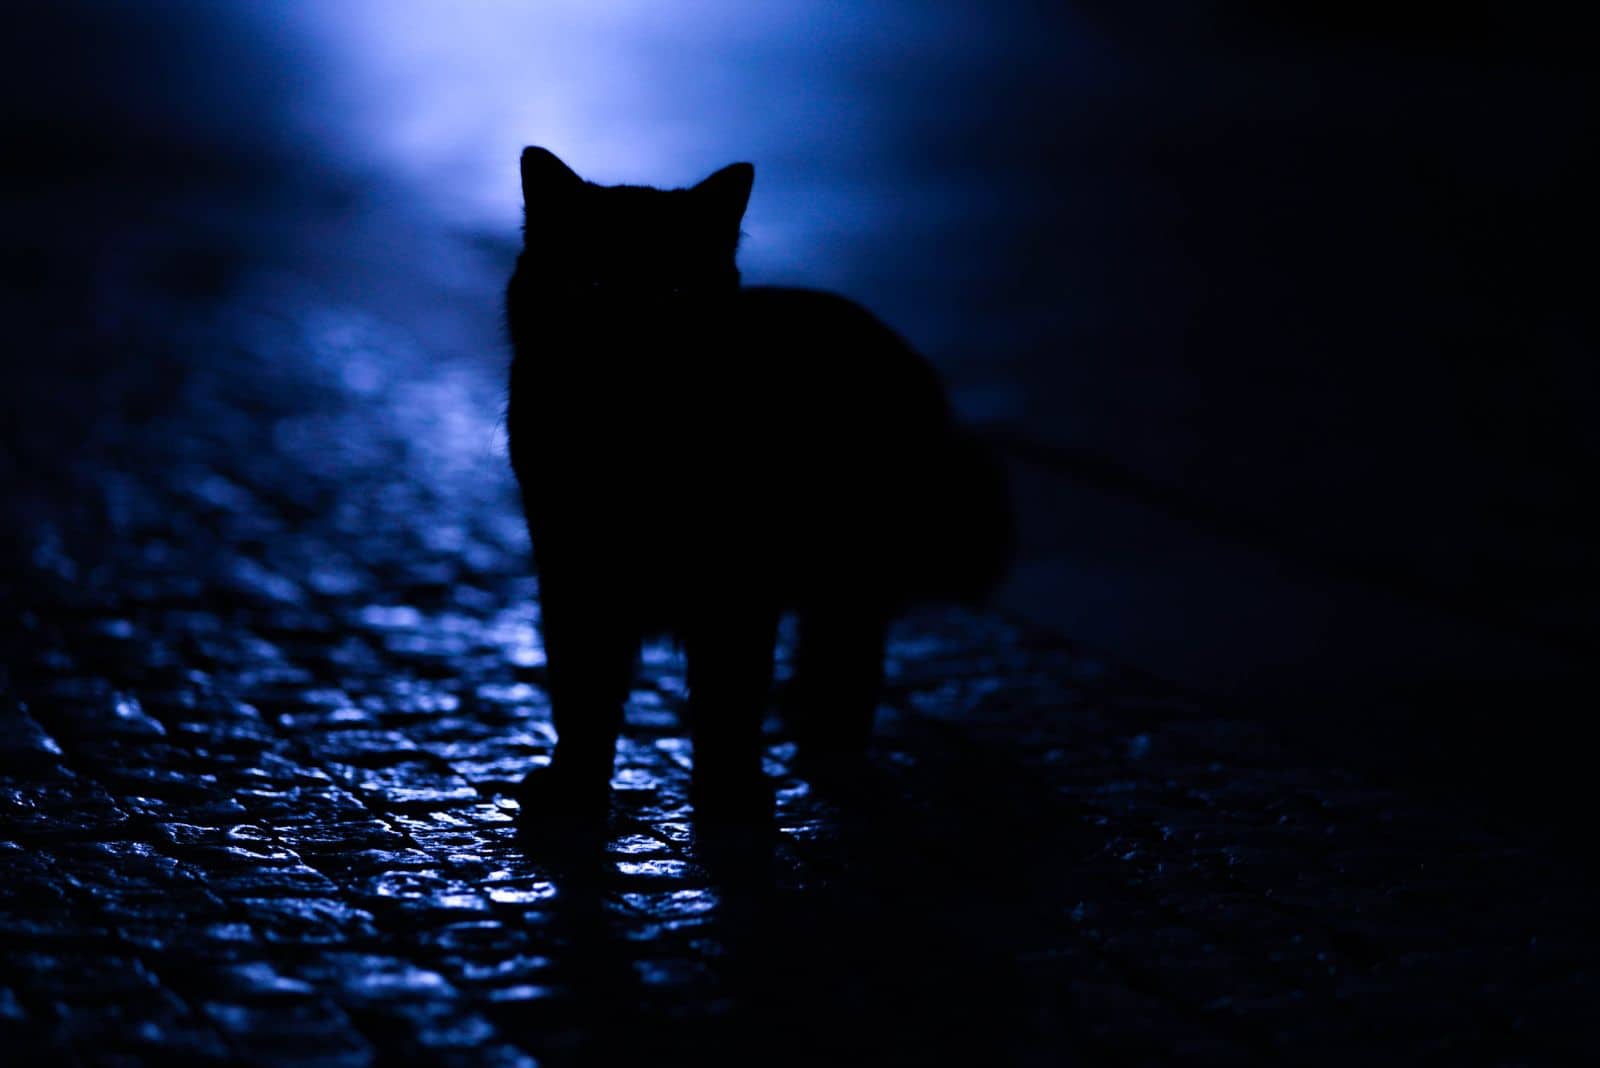 the cat stands in the dark